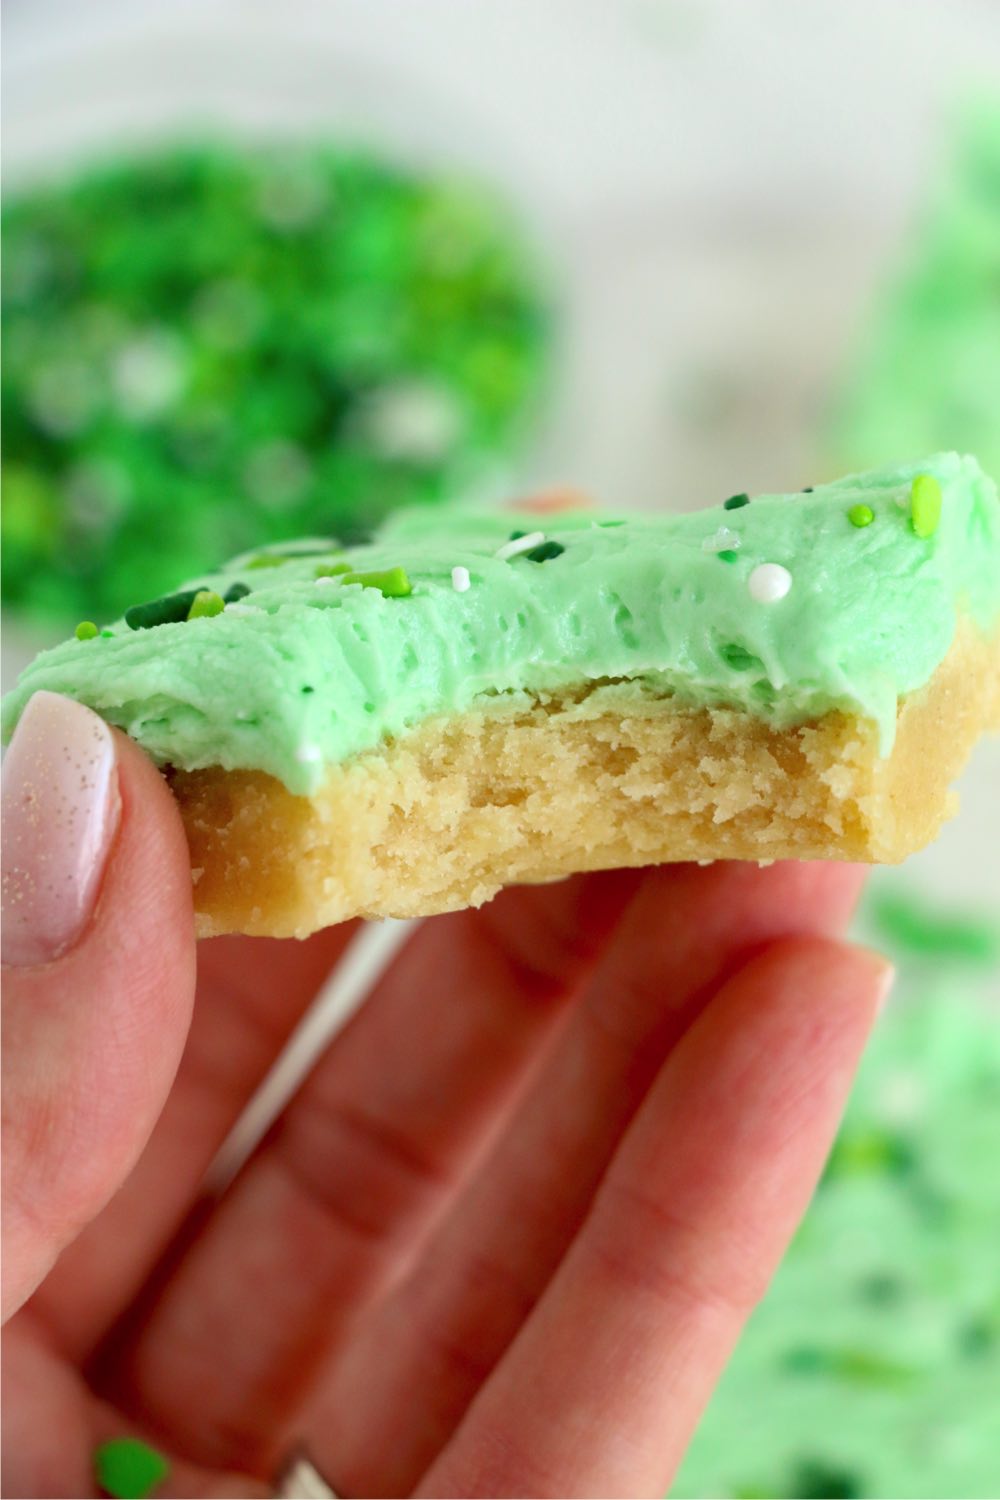 holding a sugar cookie bar with a bite out of